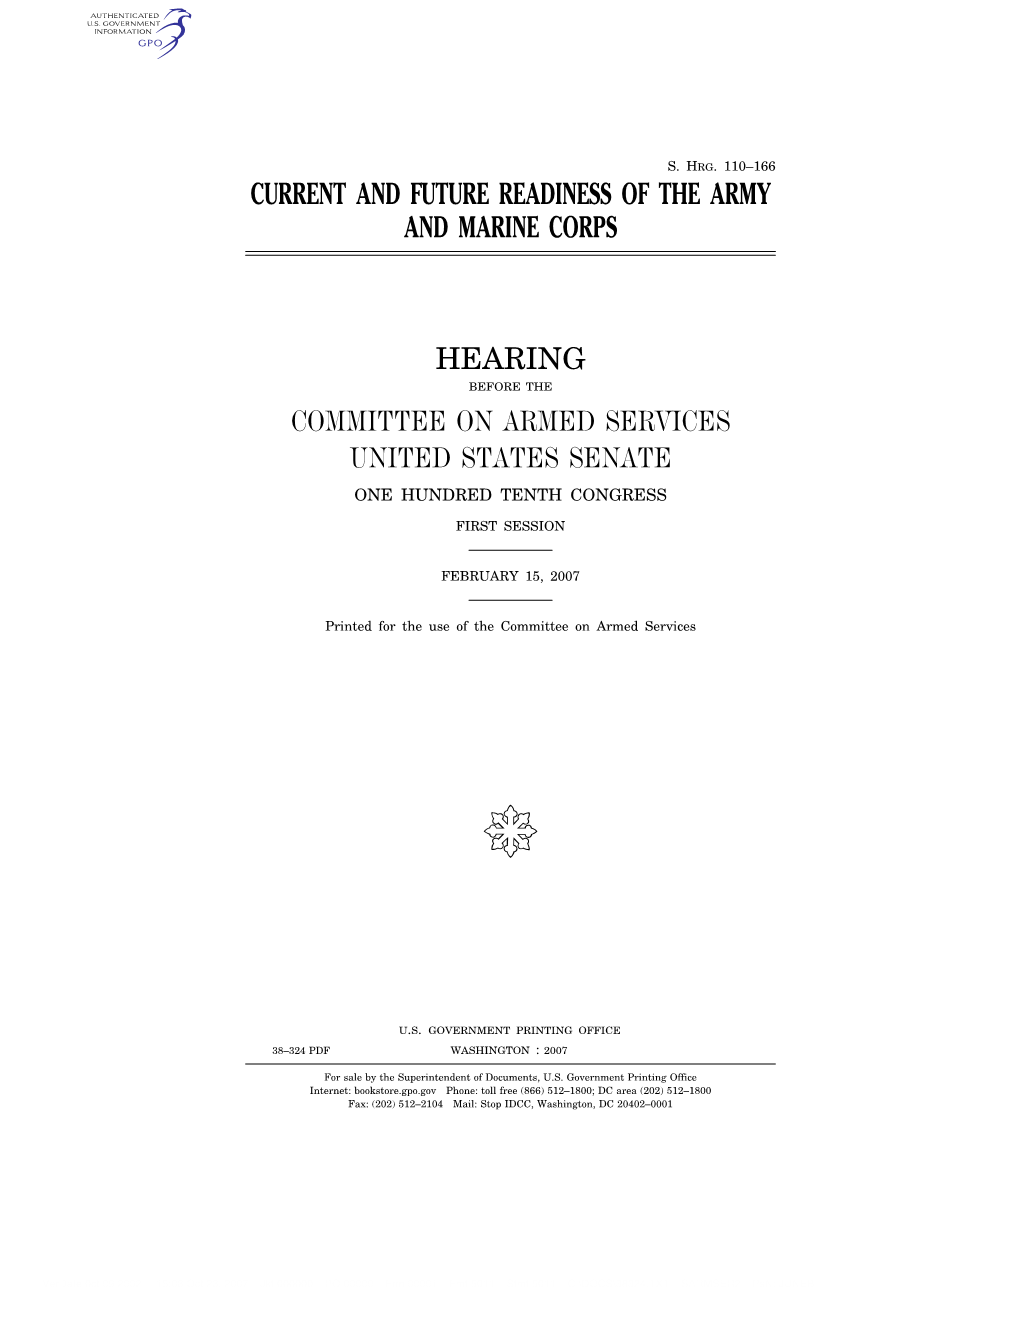 Current and Future Readiness of the Army and Marine Corps